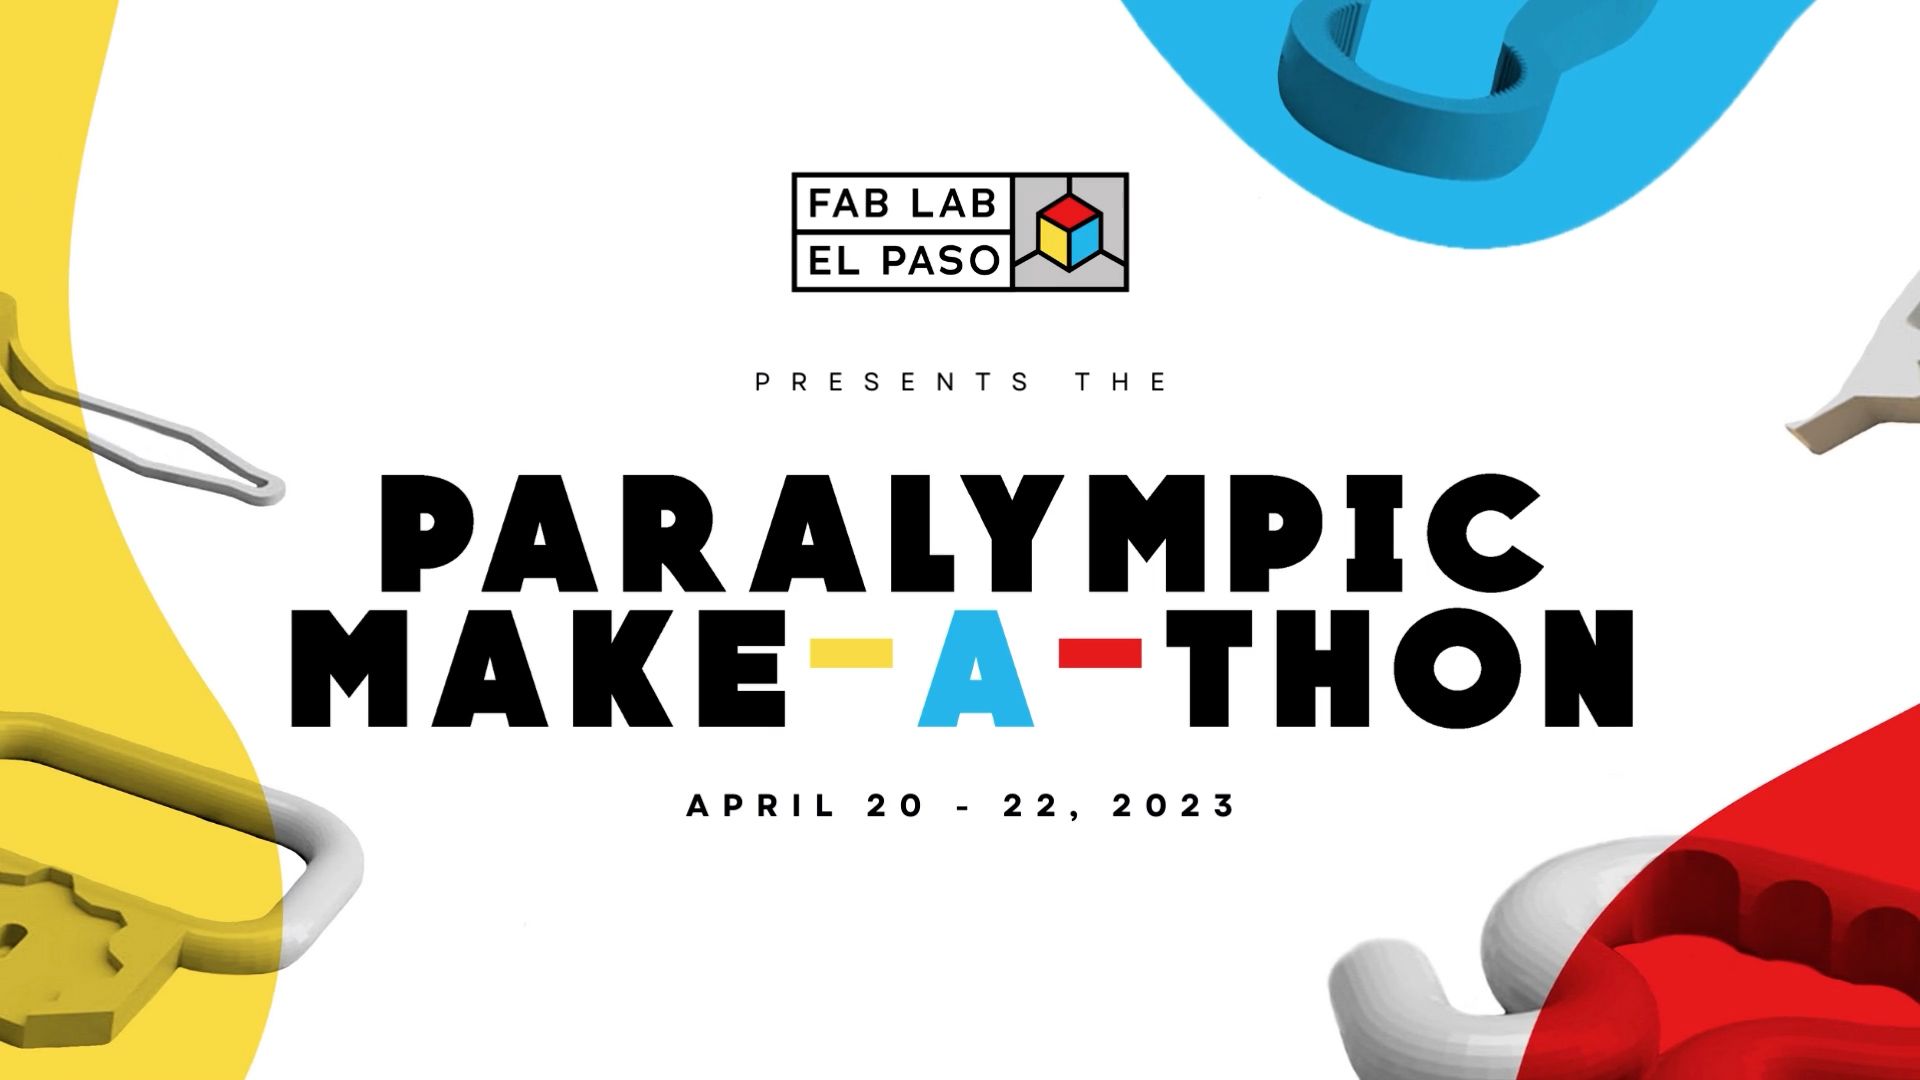 Advert for Fab Lab El Paso's Make-a-Thon event.